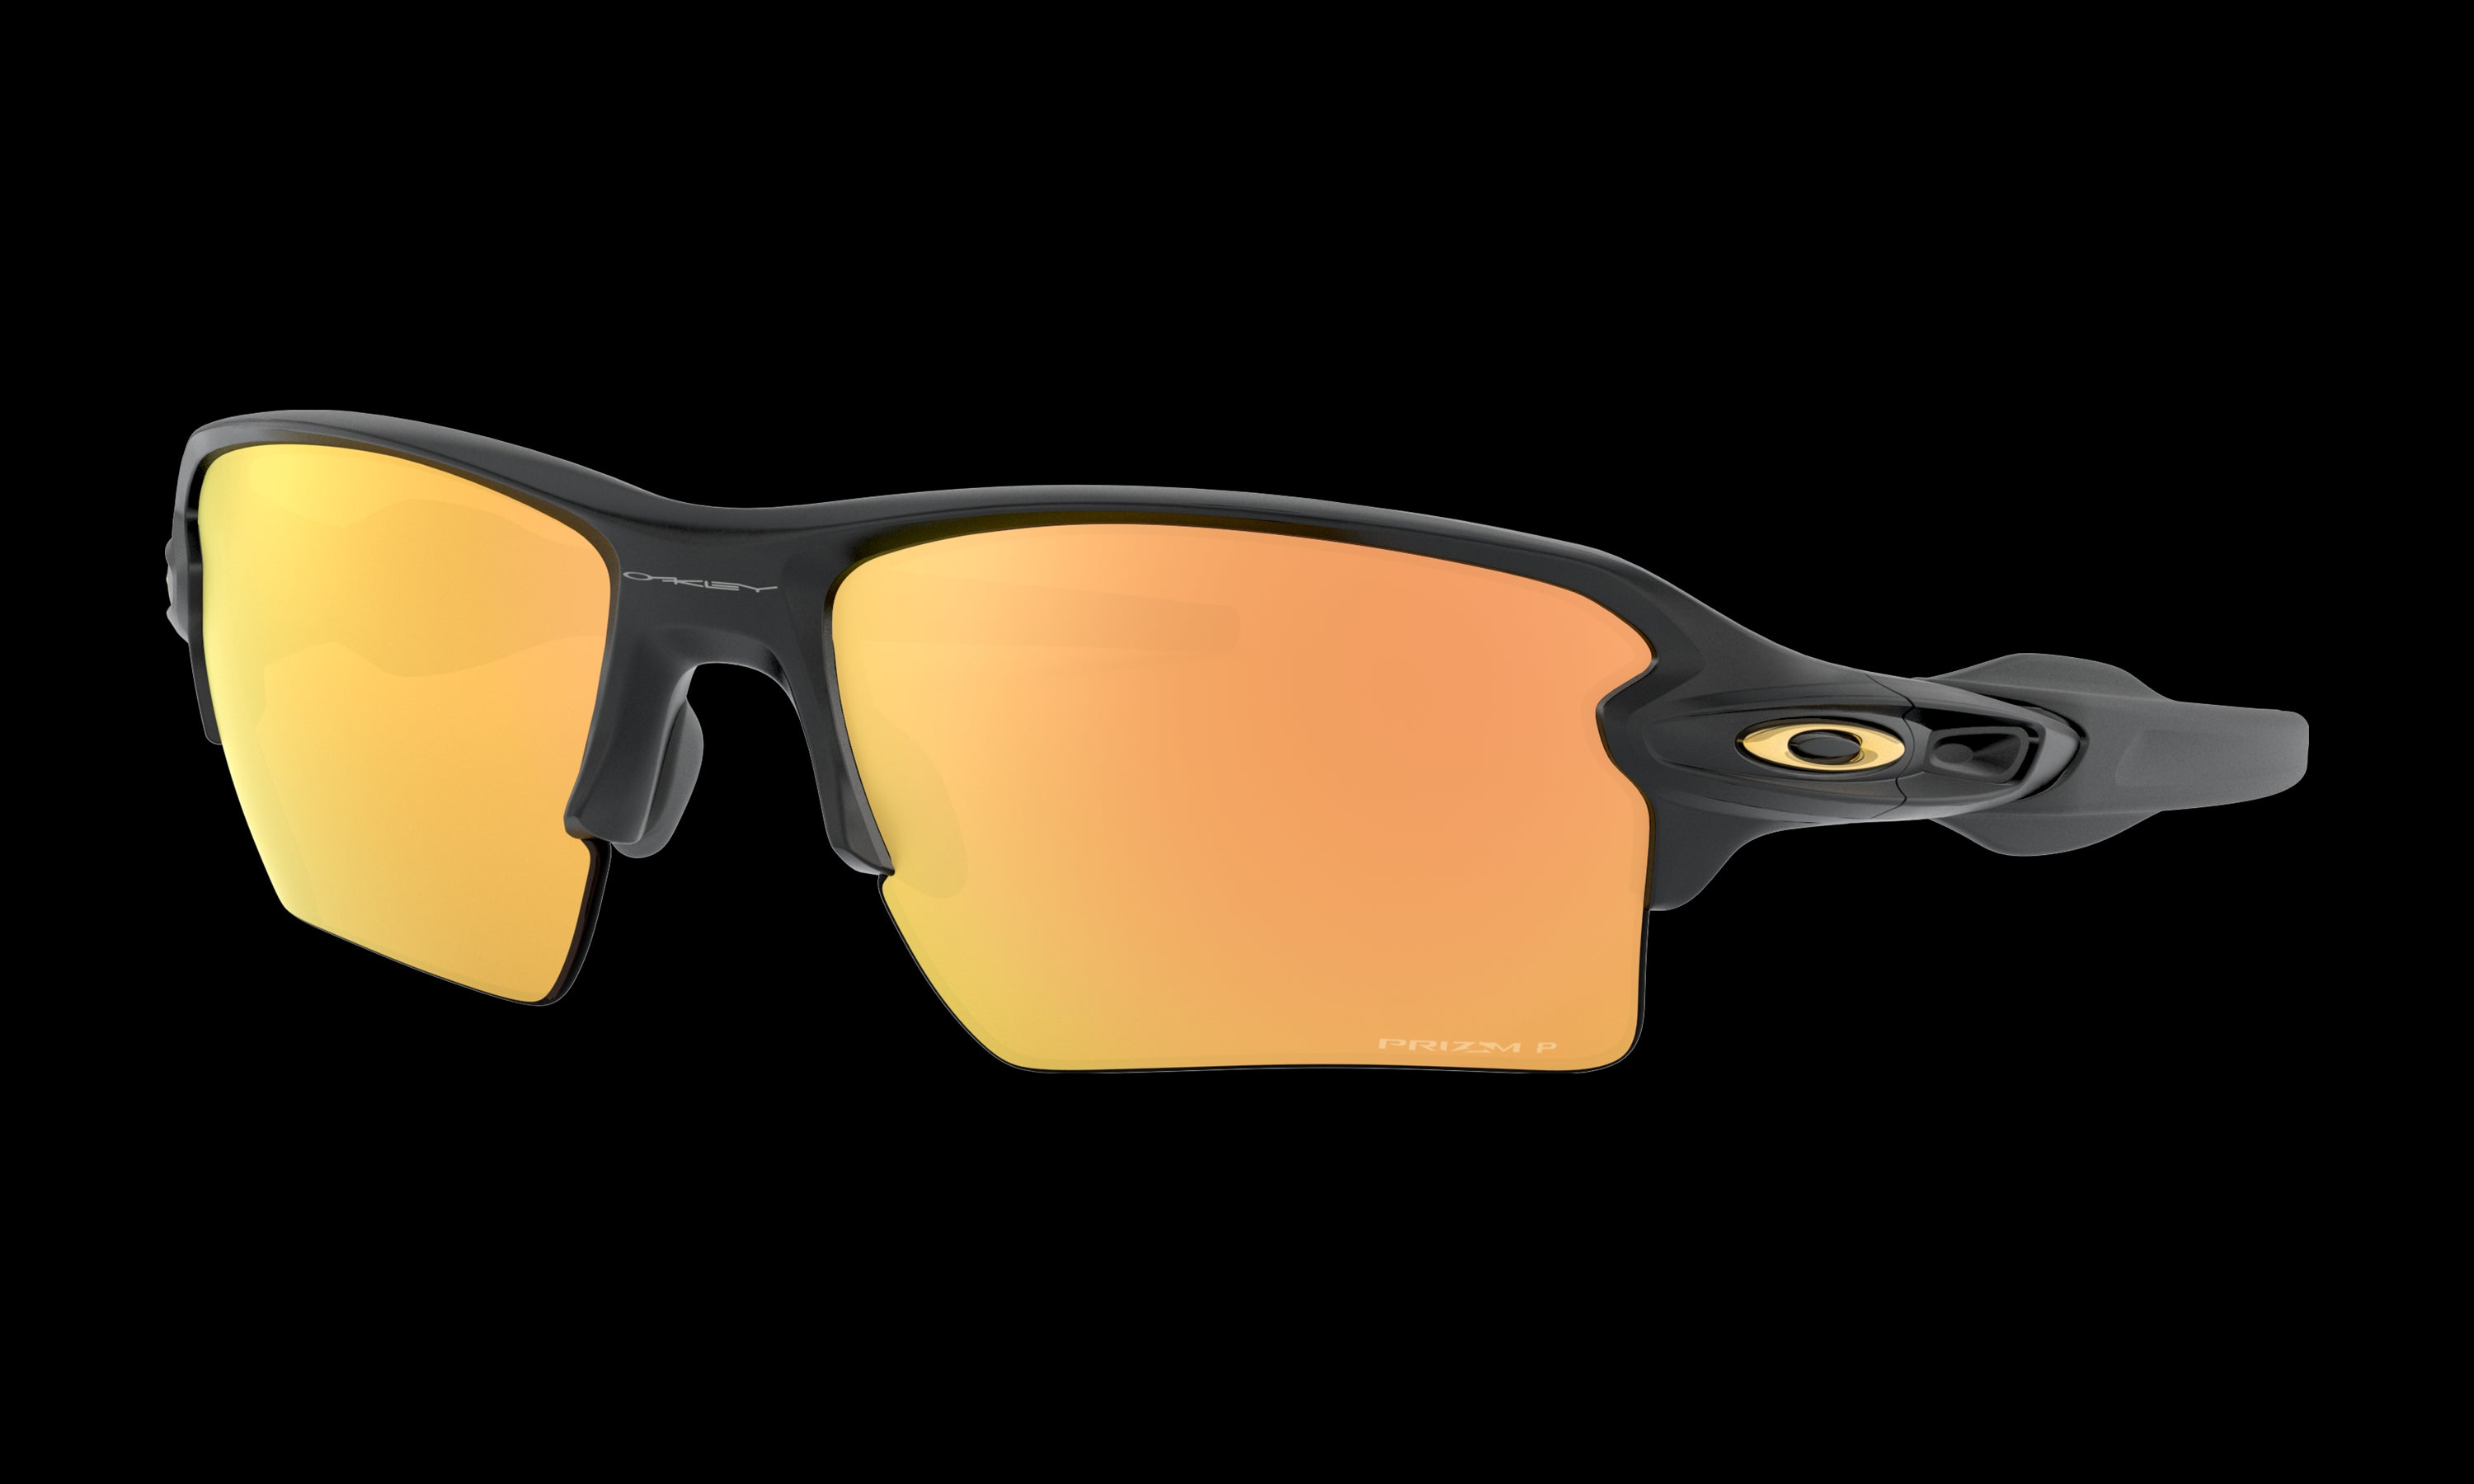 Men's Oakley 2.0 Sunglasses|Polarized, Durable – Outdoor Equipped